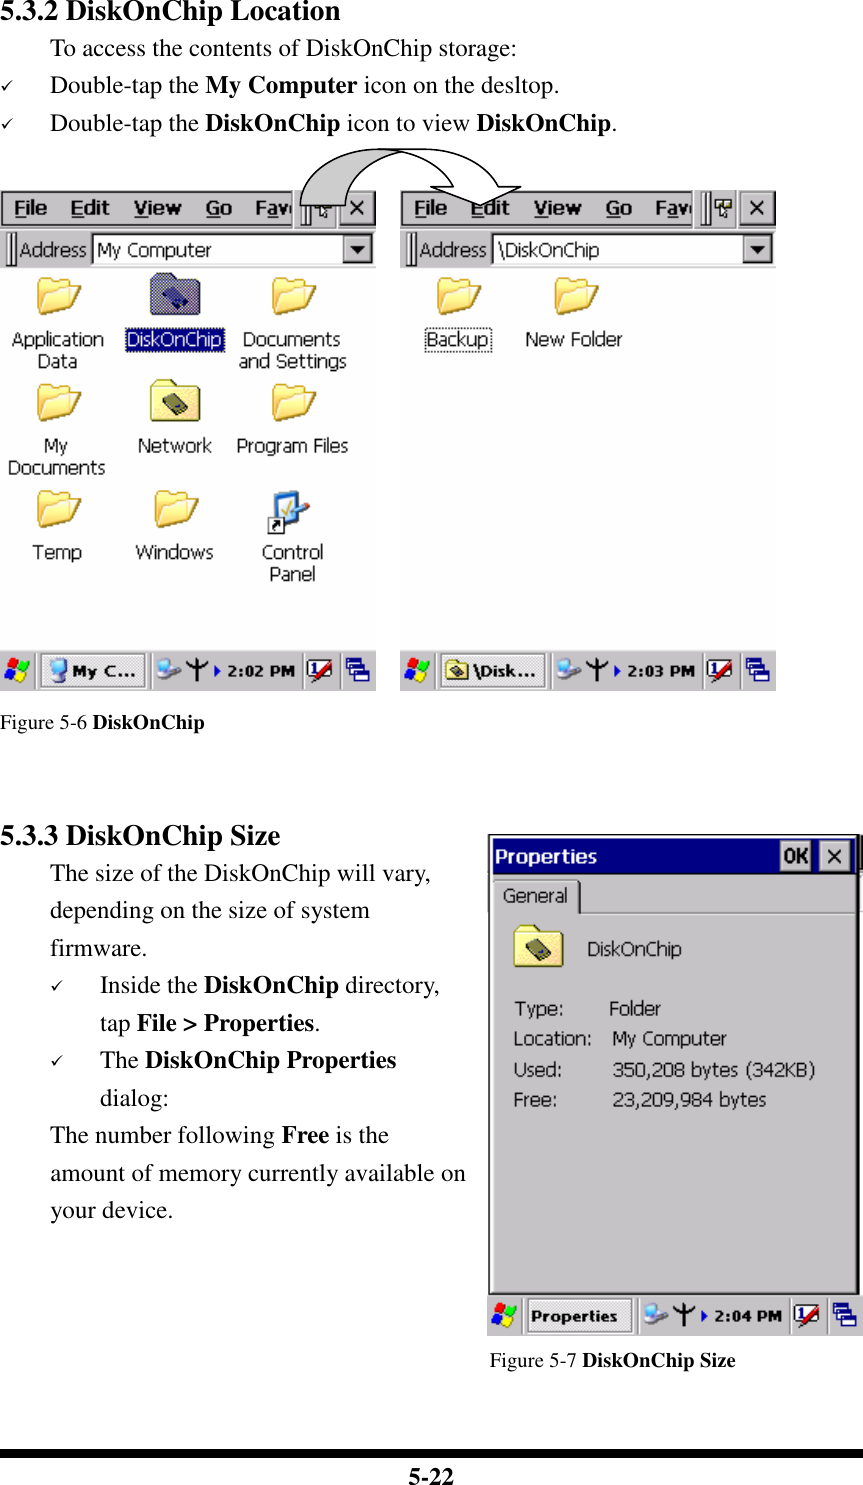  5-22 5.3.2 DiskOnChip Location To access the contents of DiskOnChip storage:  Double-tap the My Computer icon on the desltop.  Double-tap the DiskOnChip icon to view DiskOnChip.       Figure 5-6 DiskOnChip   5.3.3 DiskOnChip Size The size of the DiskOnChip will vary, depending on the size of system firmware.  Inside the DiskOnChip directory, tap File &gt; Properties.  The DiskOnChip Properties dialog: The number following Free is the amount of memory currently available on your device.                                                   Figure 5-7 DiskOnChip Size  